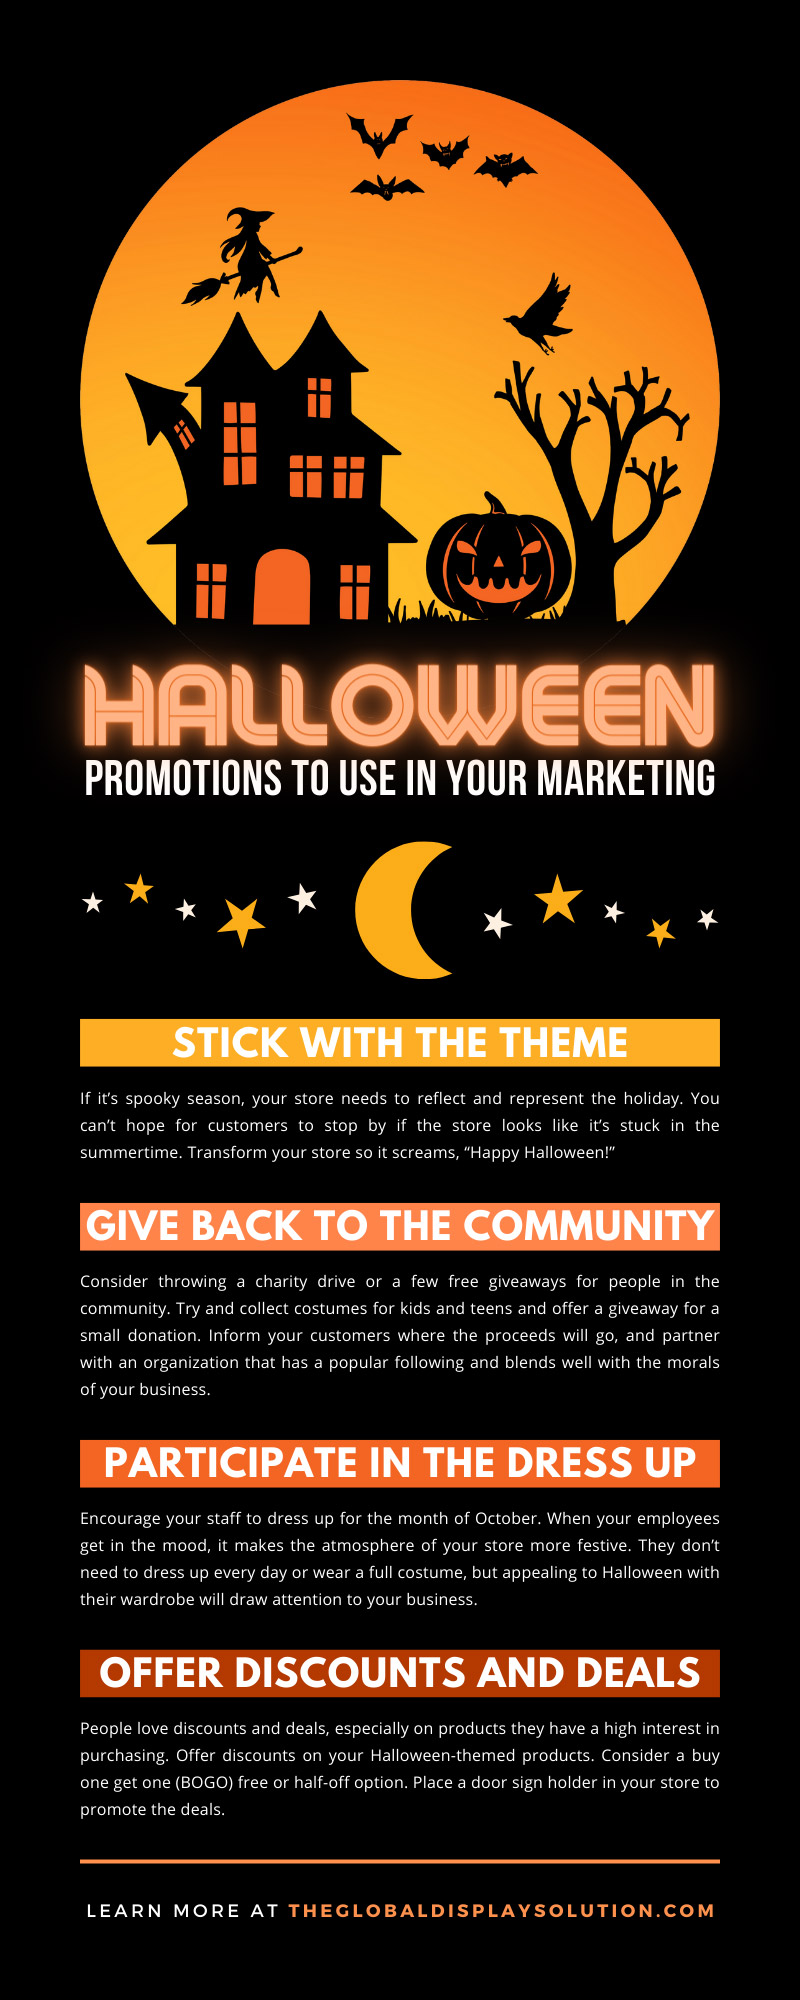 Do you participating in themes? How about Halloween? It might be